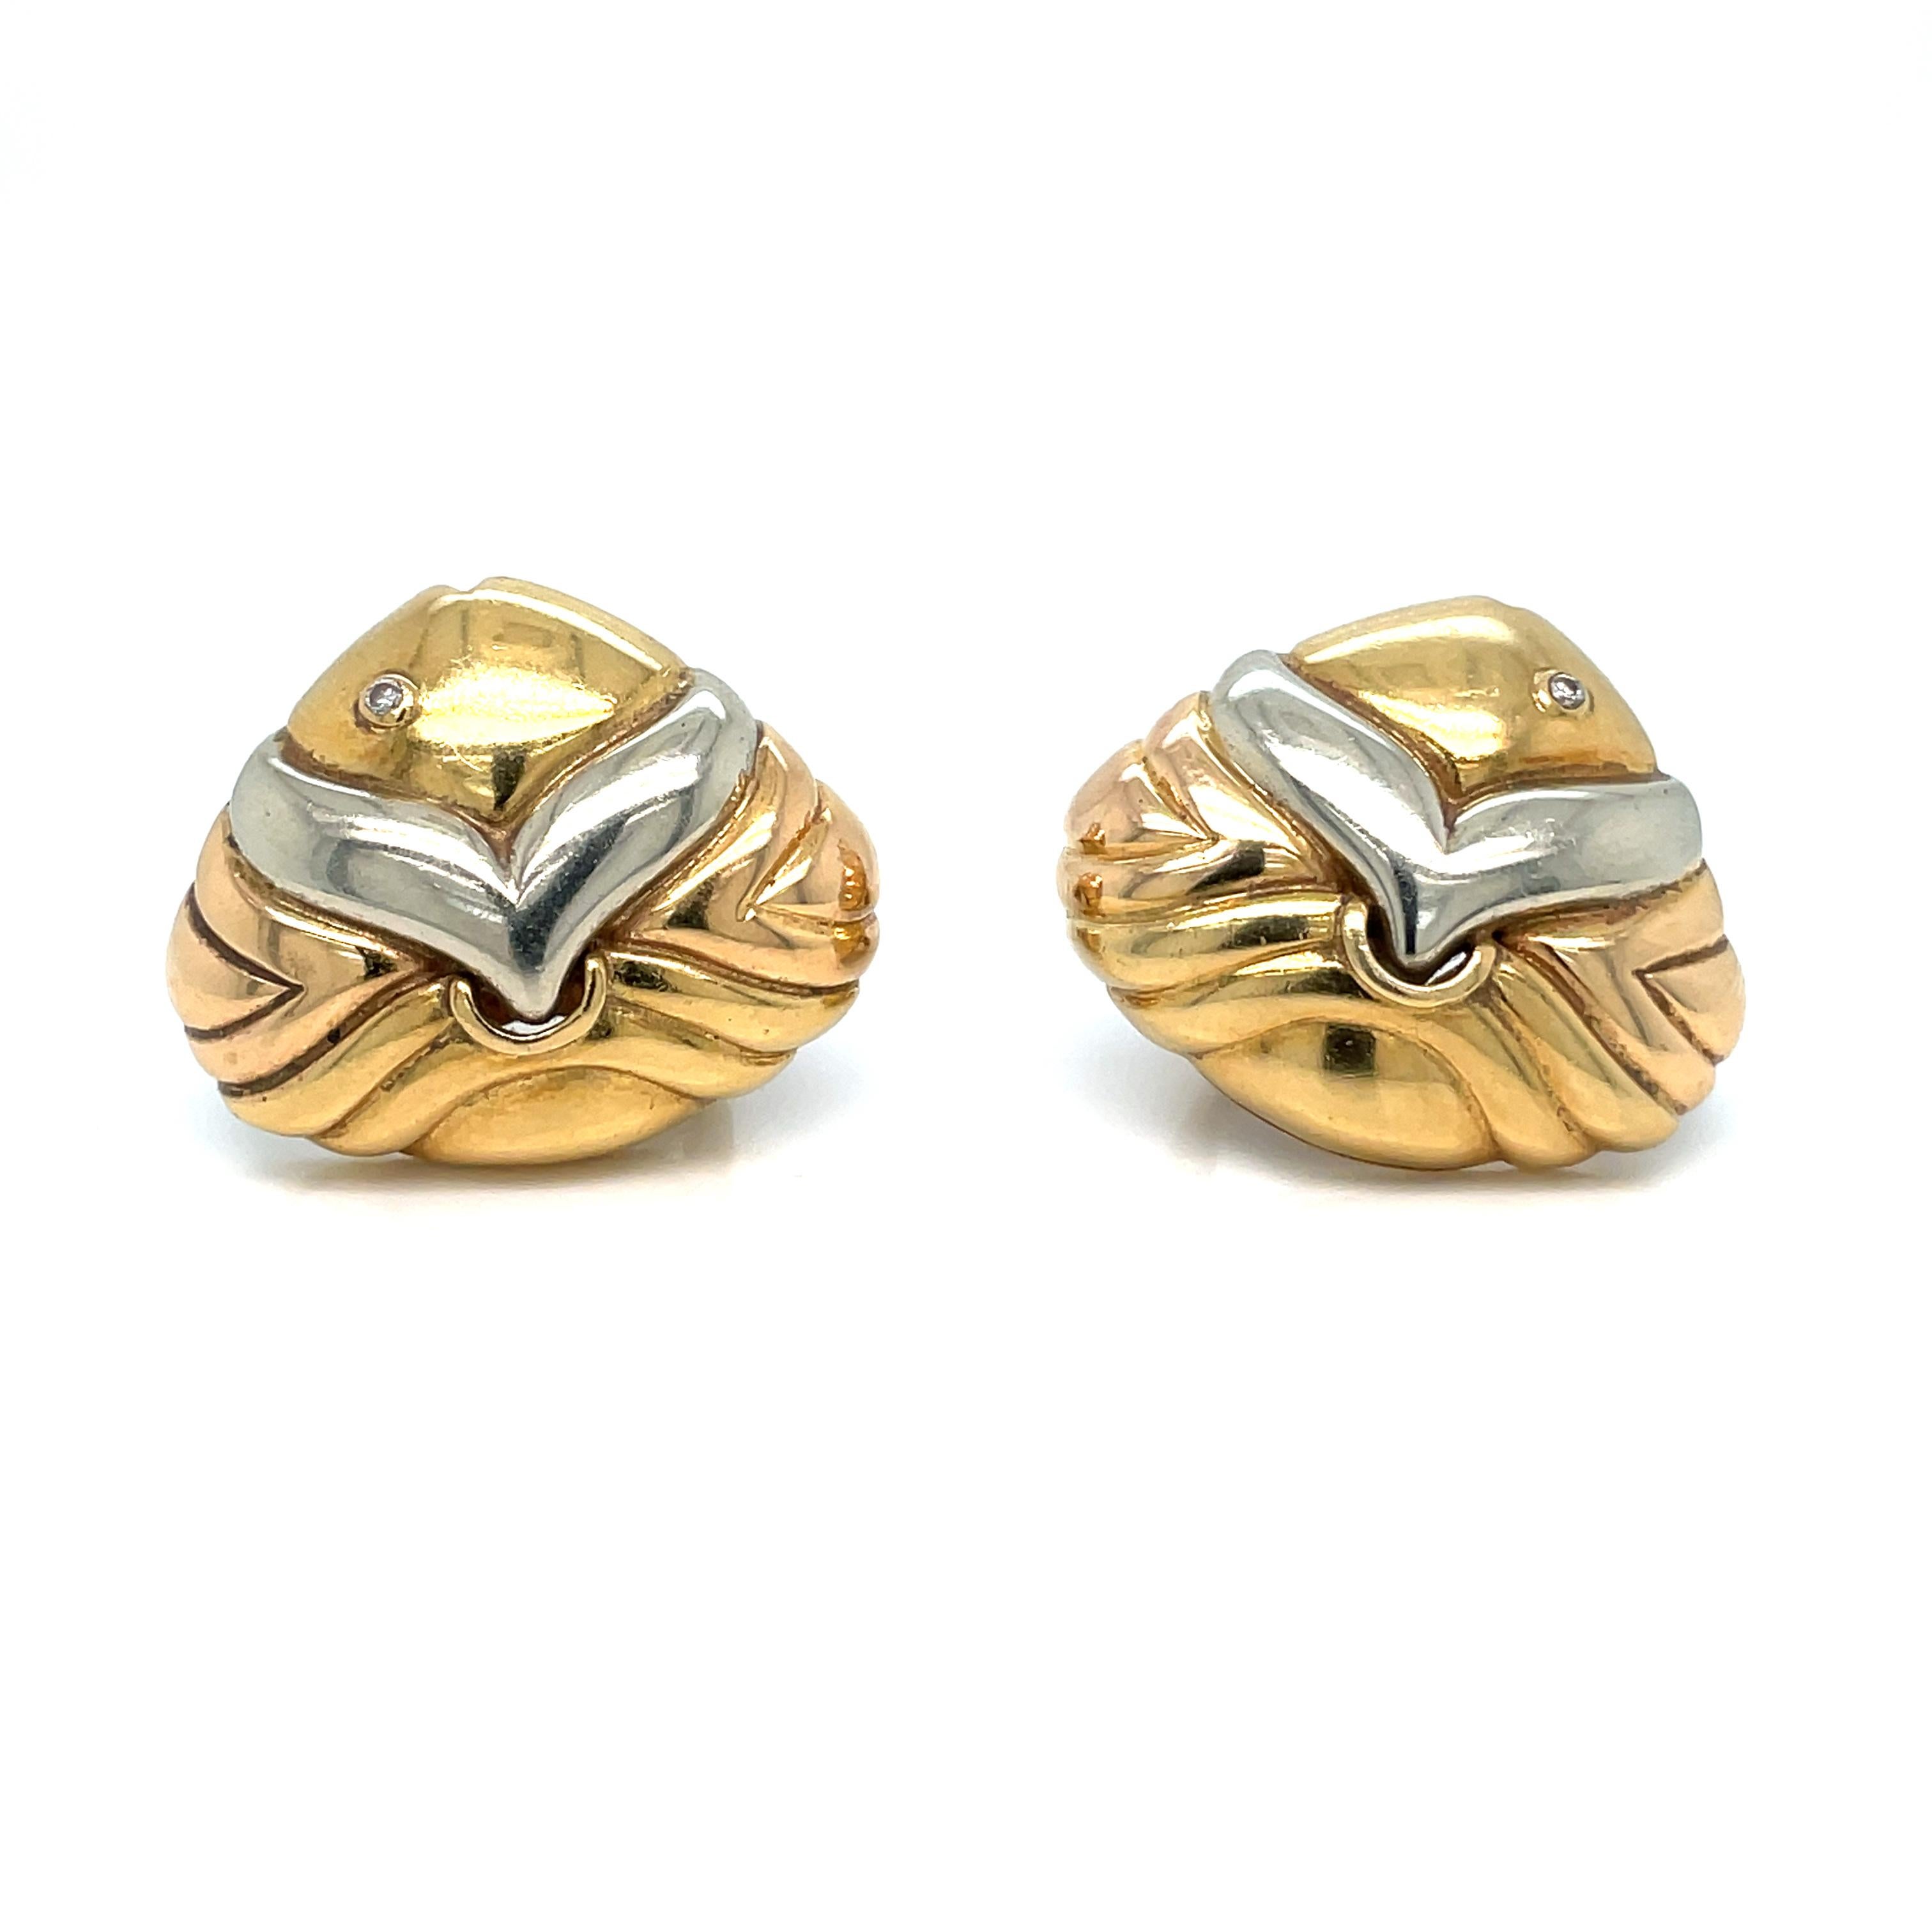 Pair of Tricolor Gold and Diamond Fish Earclips, Bulgari
18 kt. yellow, rose and white gold, the modified triangular-shaped fluted gold earclips depicting a stylized fish's head, centering 2 small round diamond eyes.

Excellent condition,